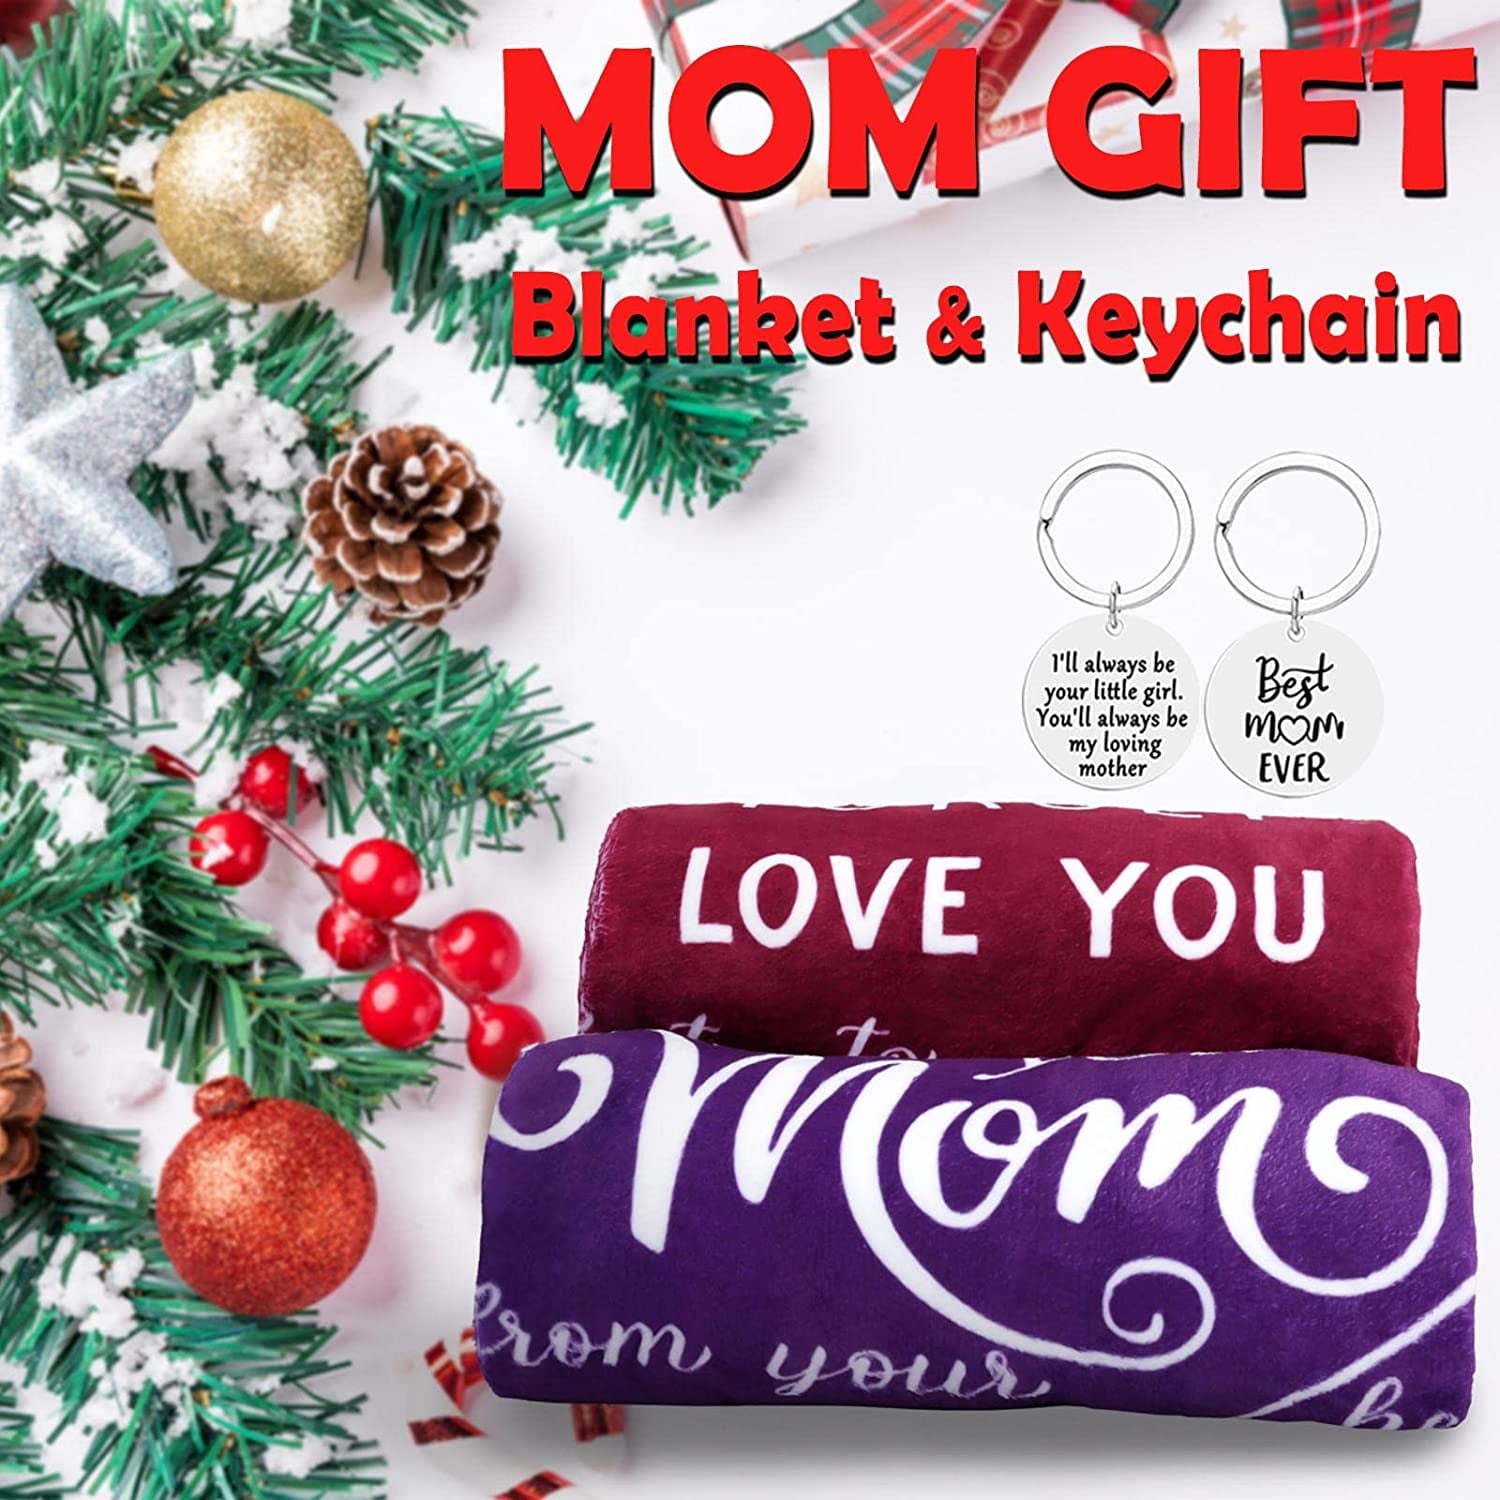 Thoughtful Christmas Gift Ideas For Mom To Be Spoiled - MeatballMom